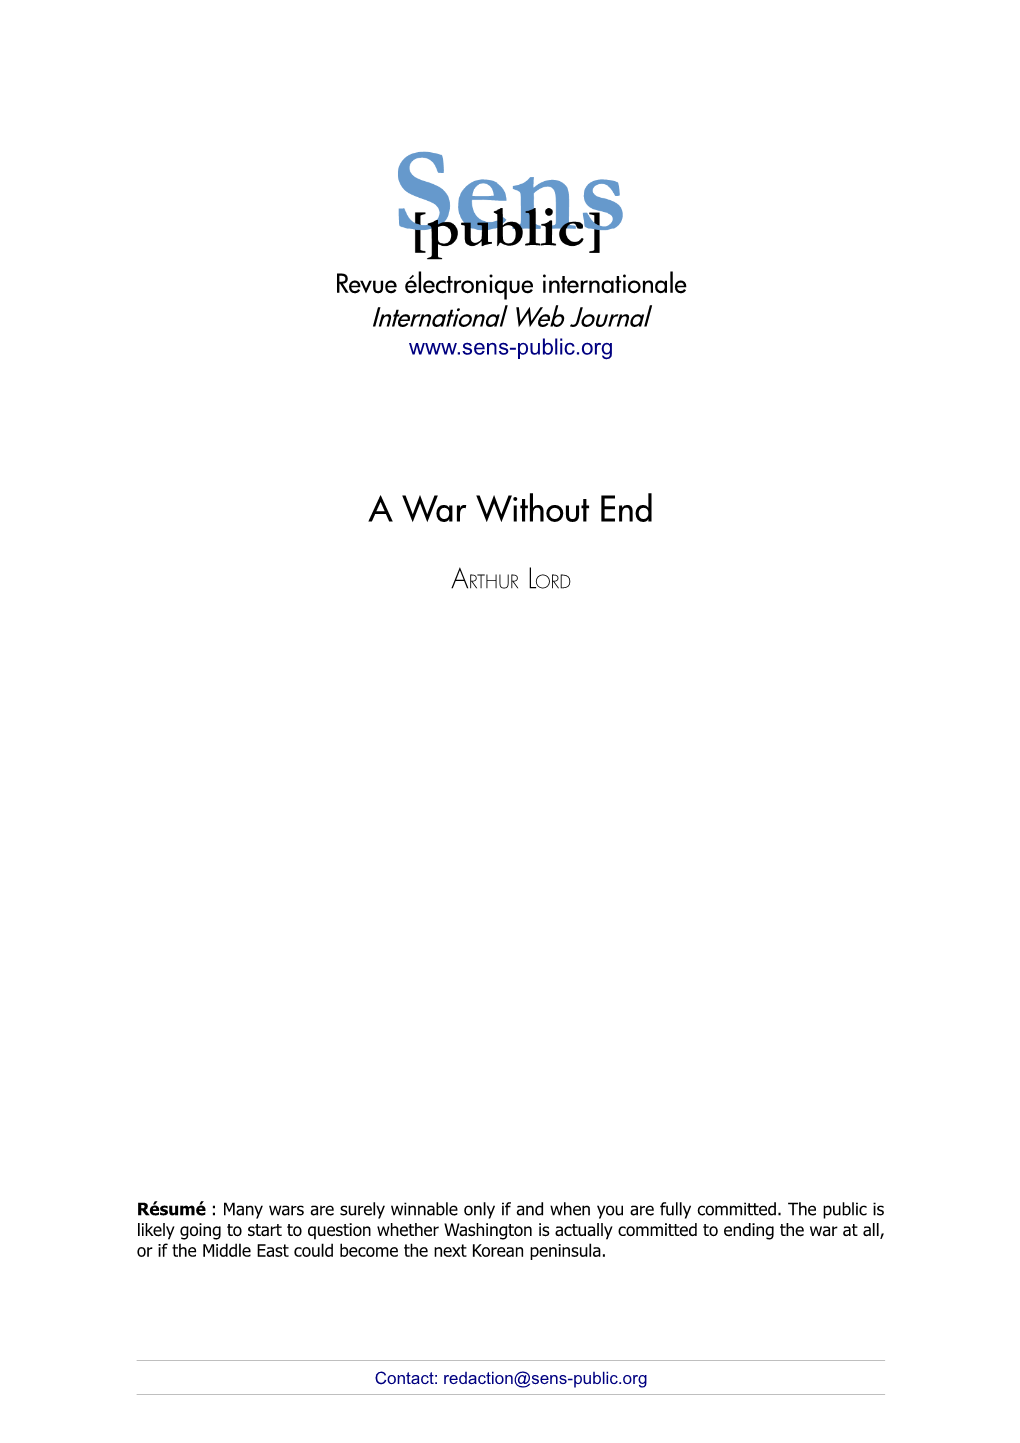 Arthur Lord, a War Without